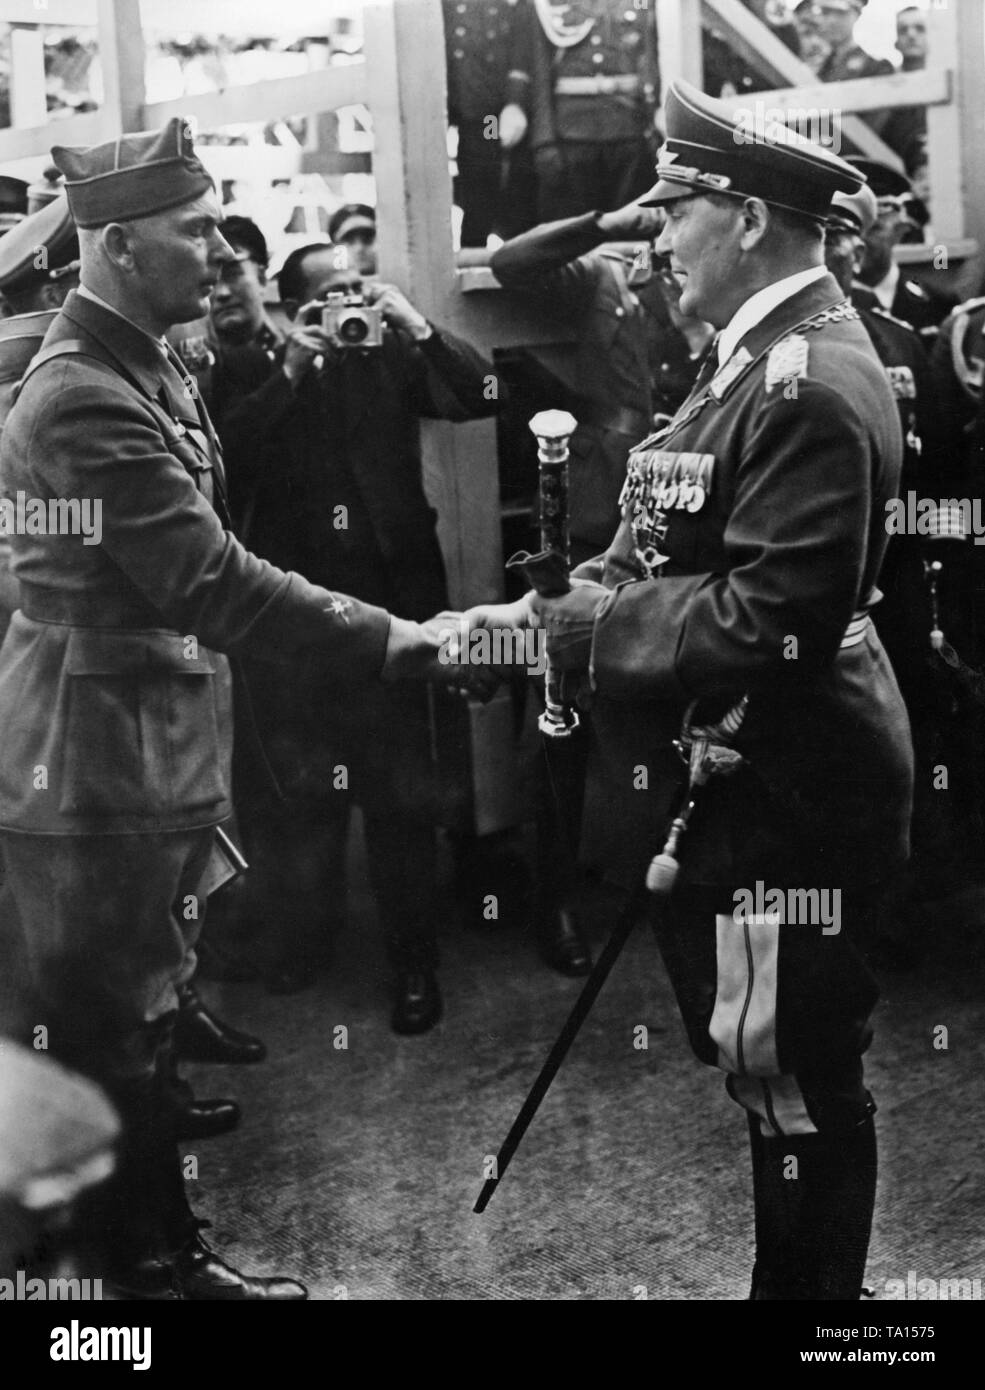 On the arrival of the Condor Legion from Spain, Field Marshal General Hermann Goering (on the right with the general's baton), greets major general Wolfram von Richthofen (left) on the gangway in St. Pauli, district of Hamburg. Stock Photo